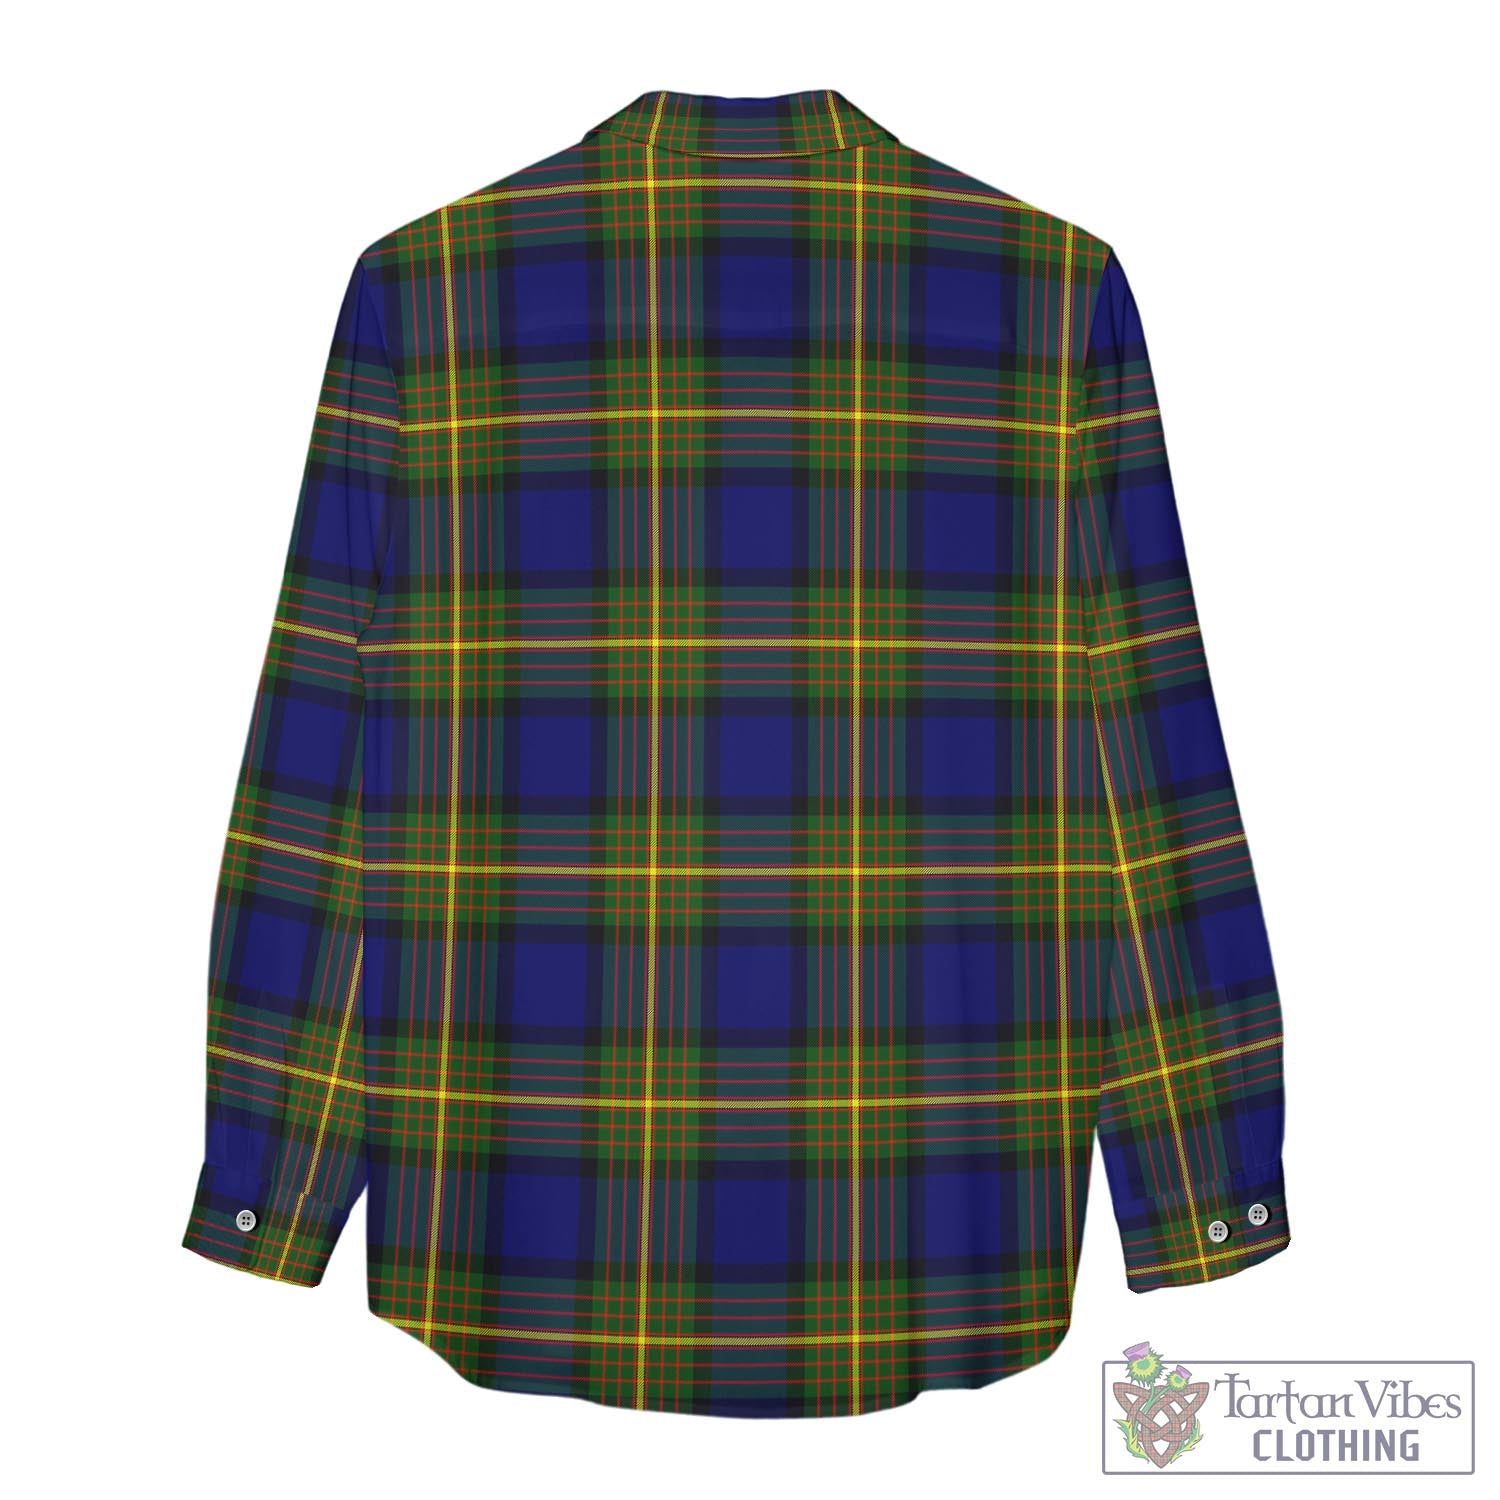 Tartan Vibes Clothing Moore Tartan Womens Casual Shirt with Family Crest